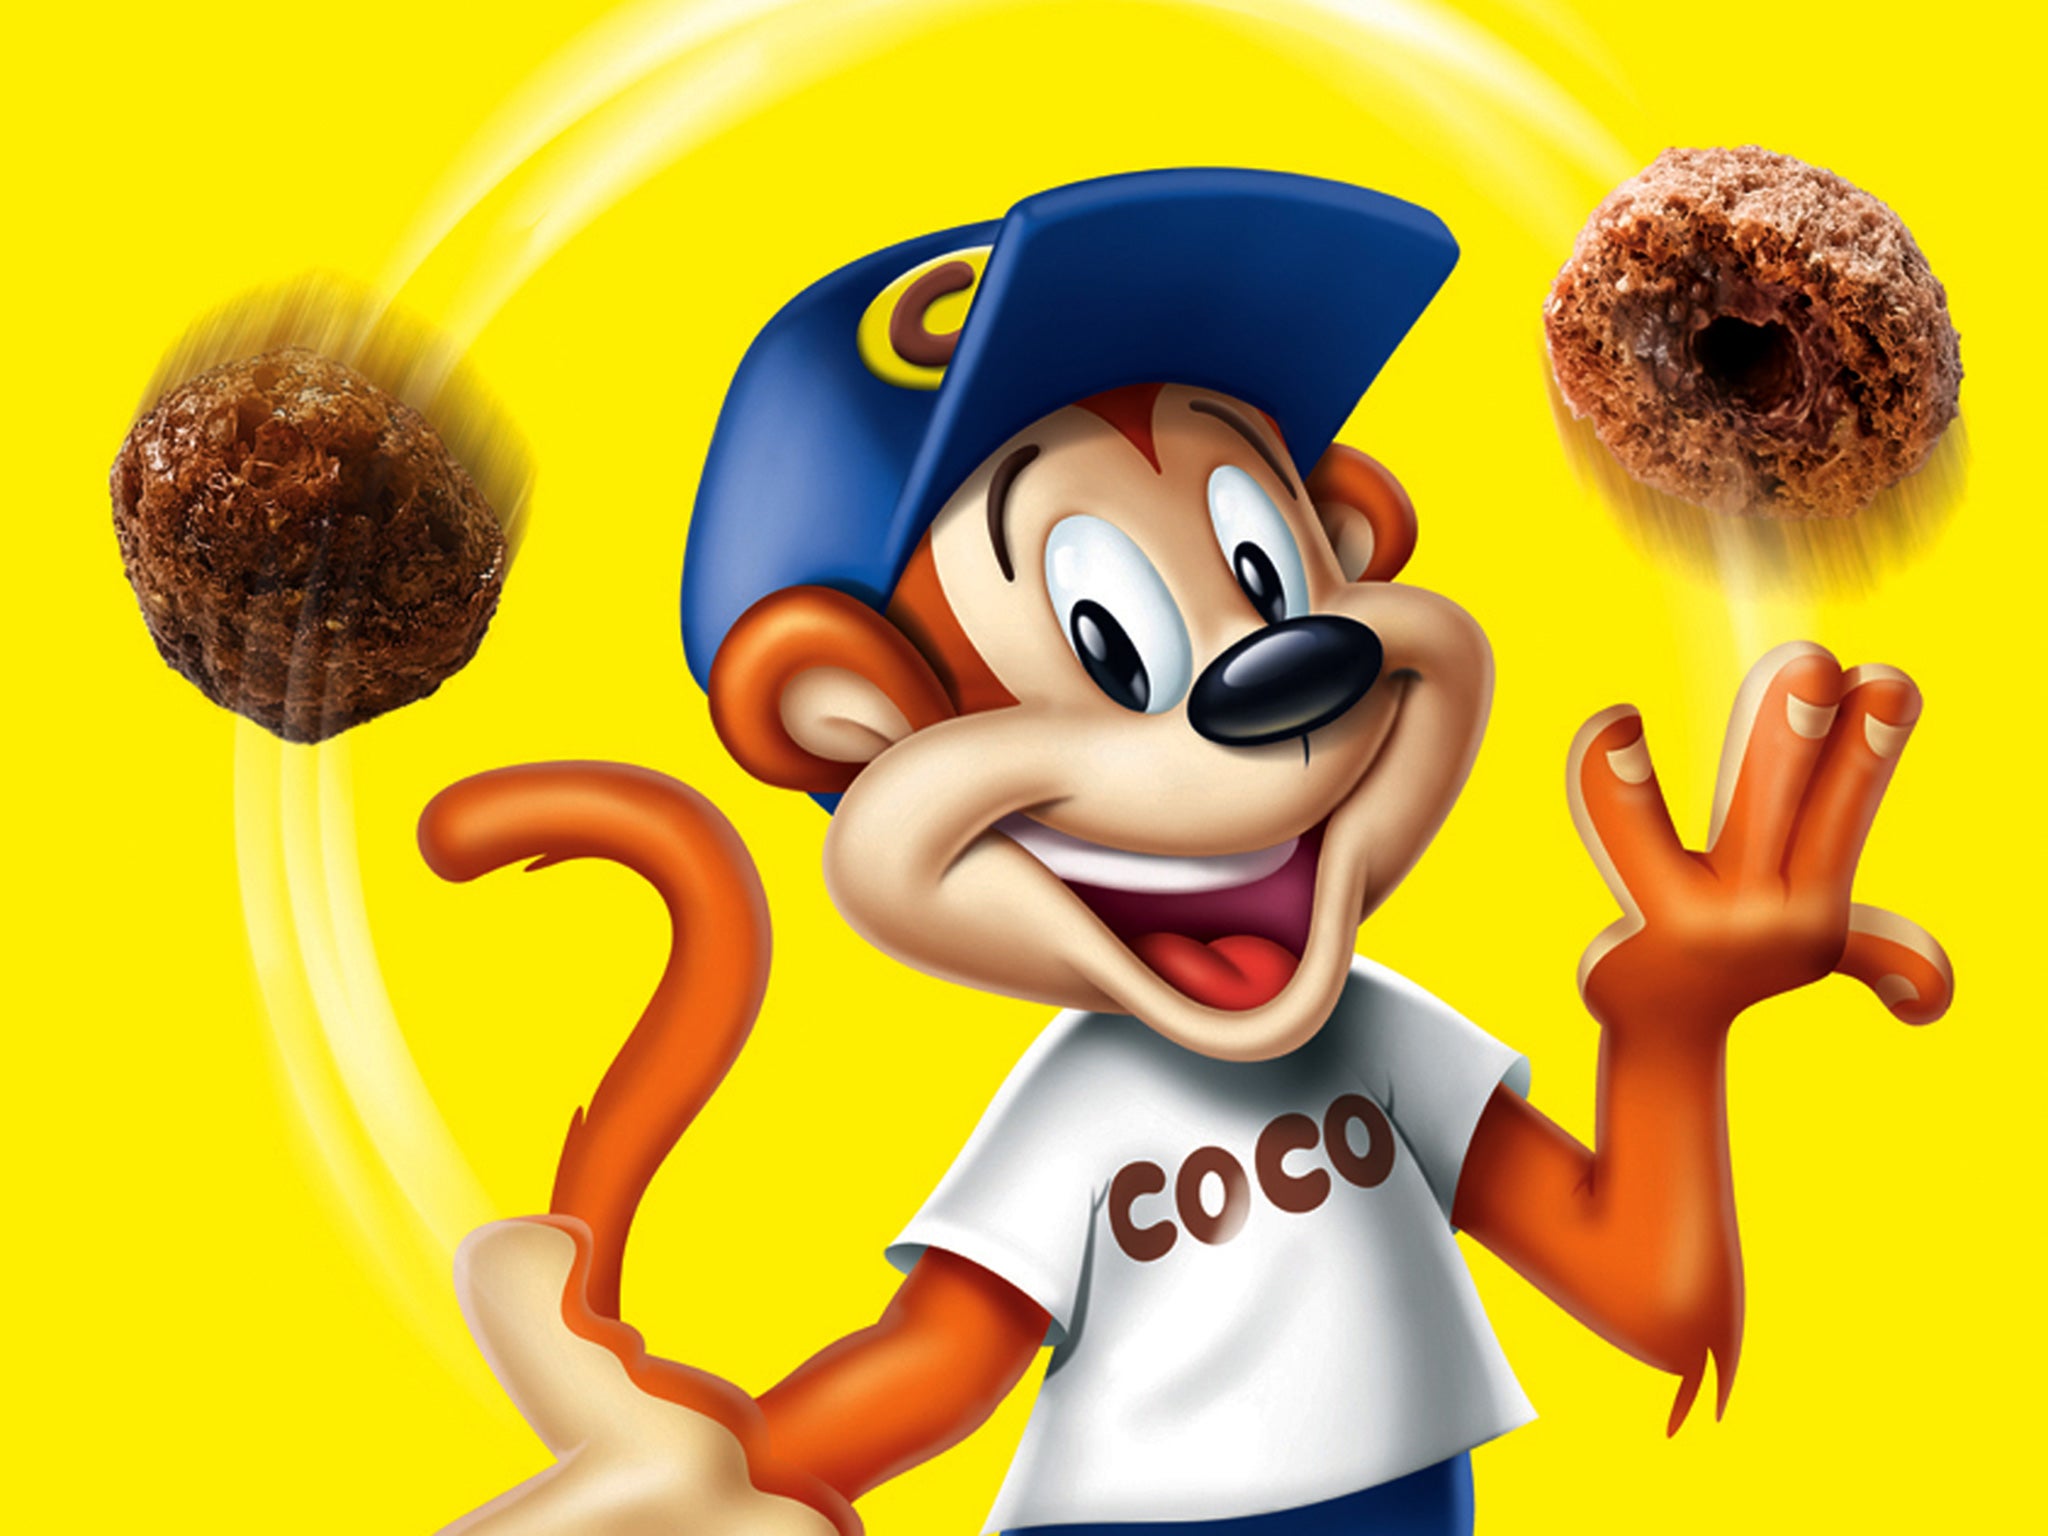 Coco the Monkey is among the characters blamed for influencing food choices